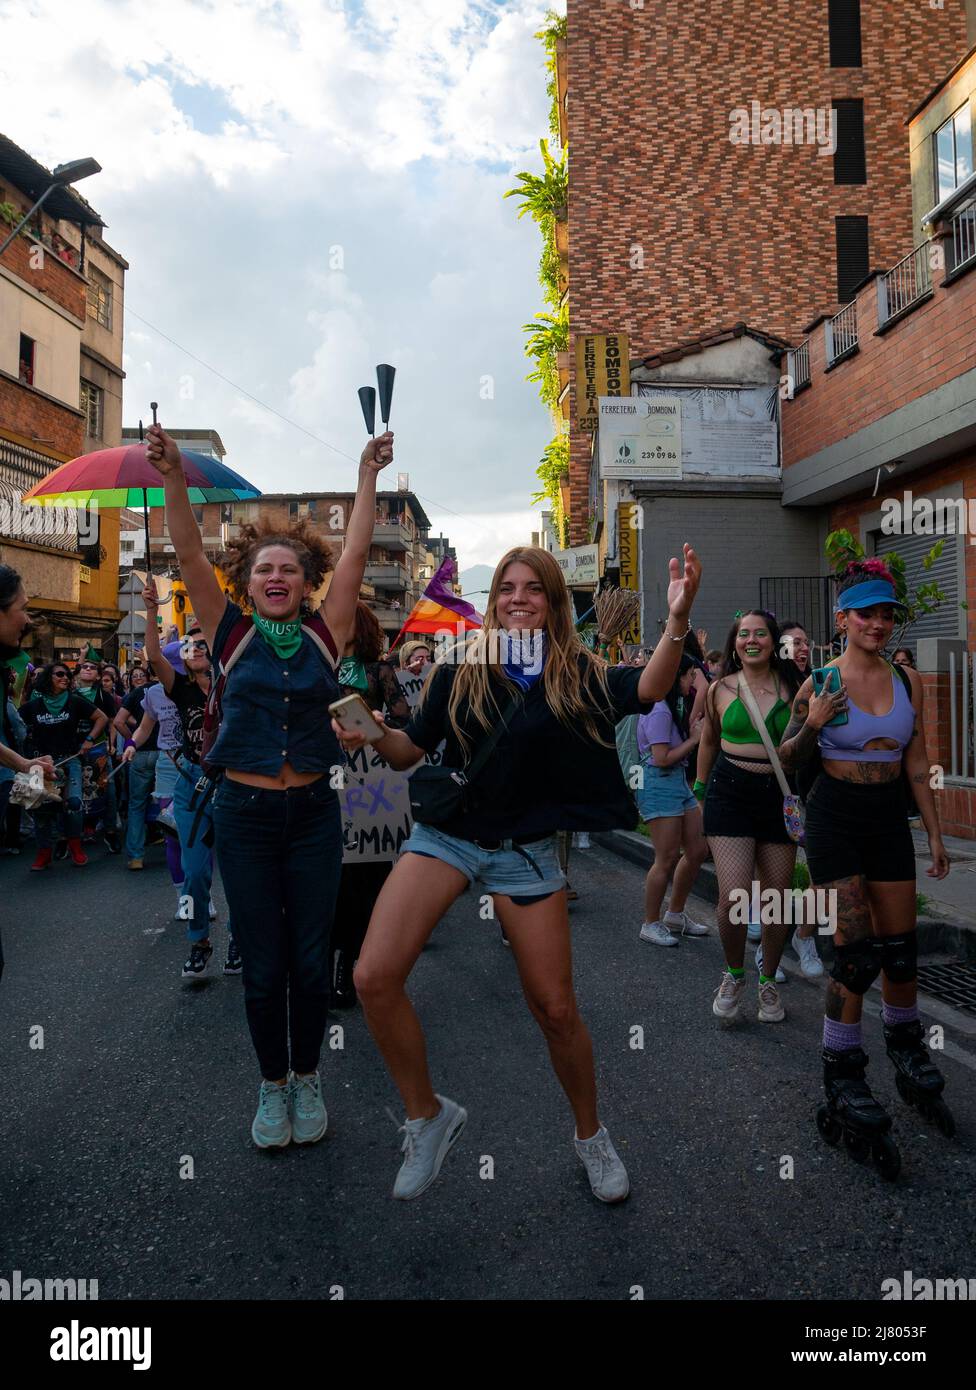 Medellin, Antioquia, Colombia - March 8 2022: Women Dressed in Purple or Green Dancing, Marching and Protesting During Woman's Day Stock Photo